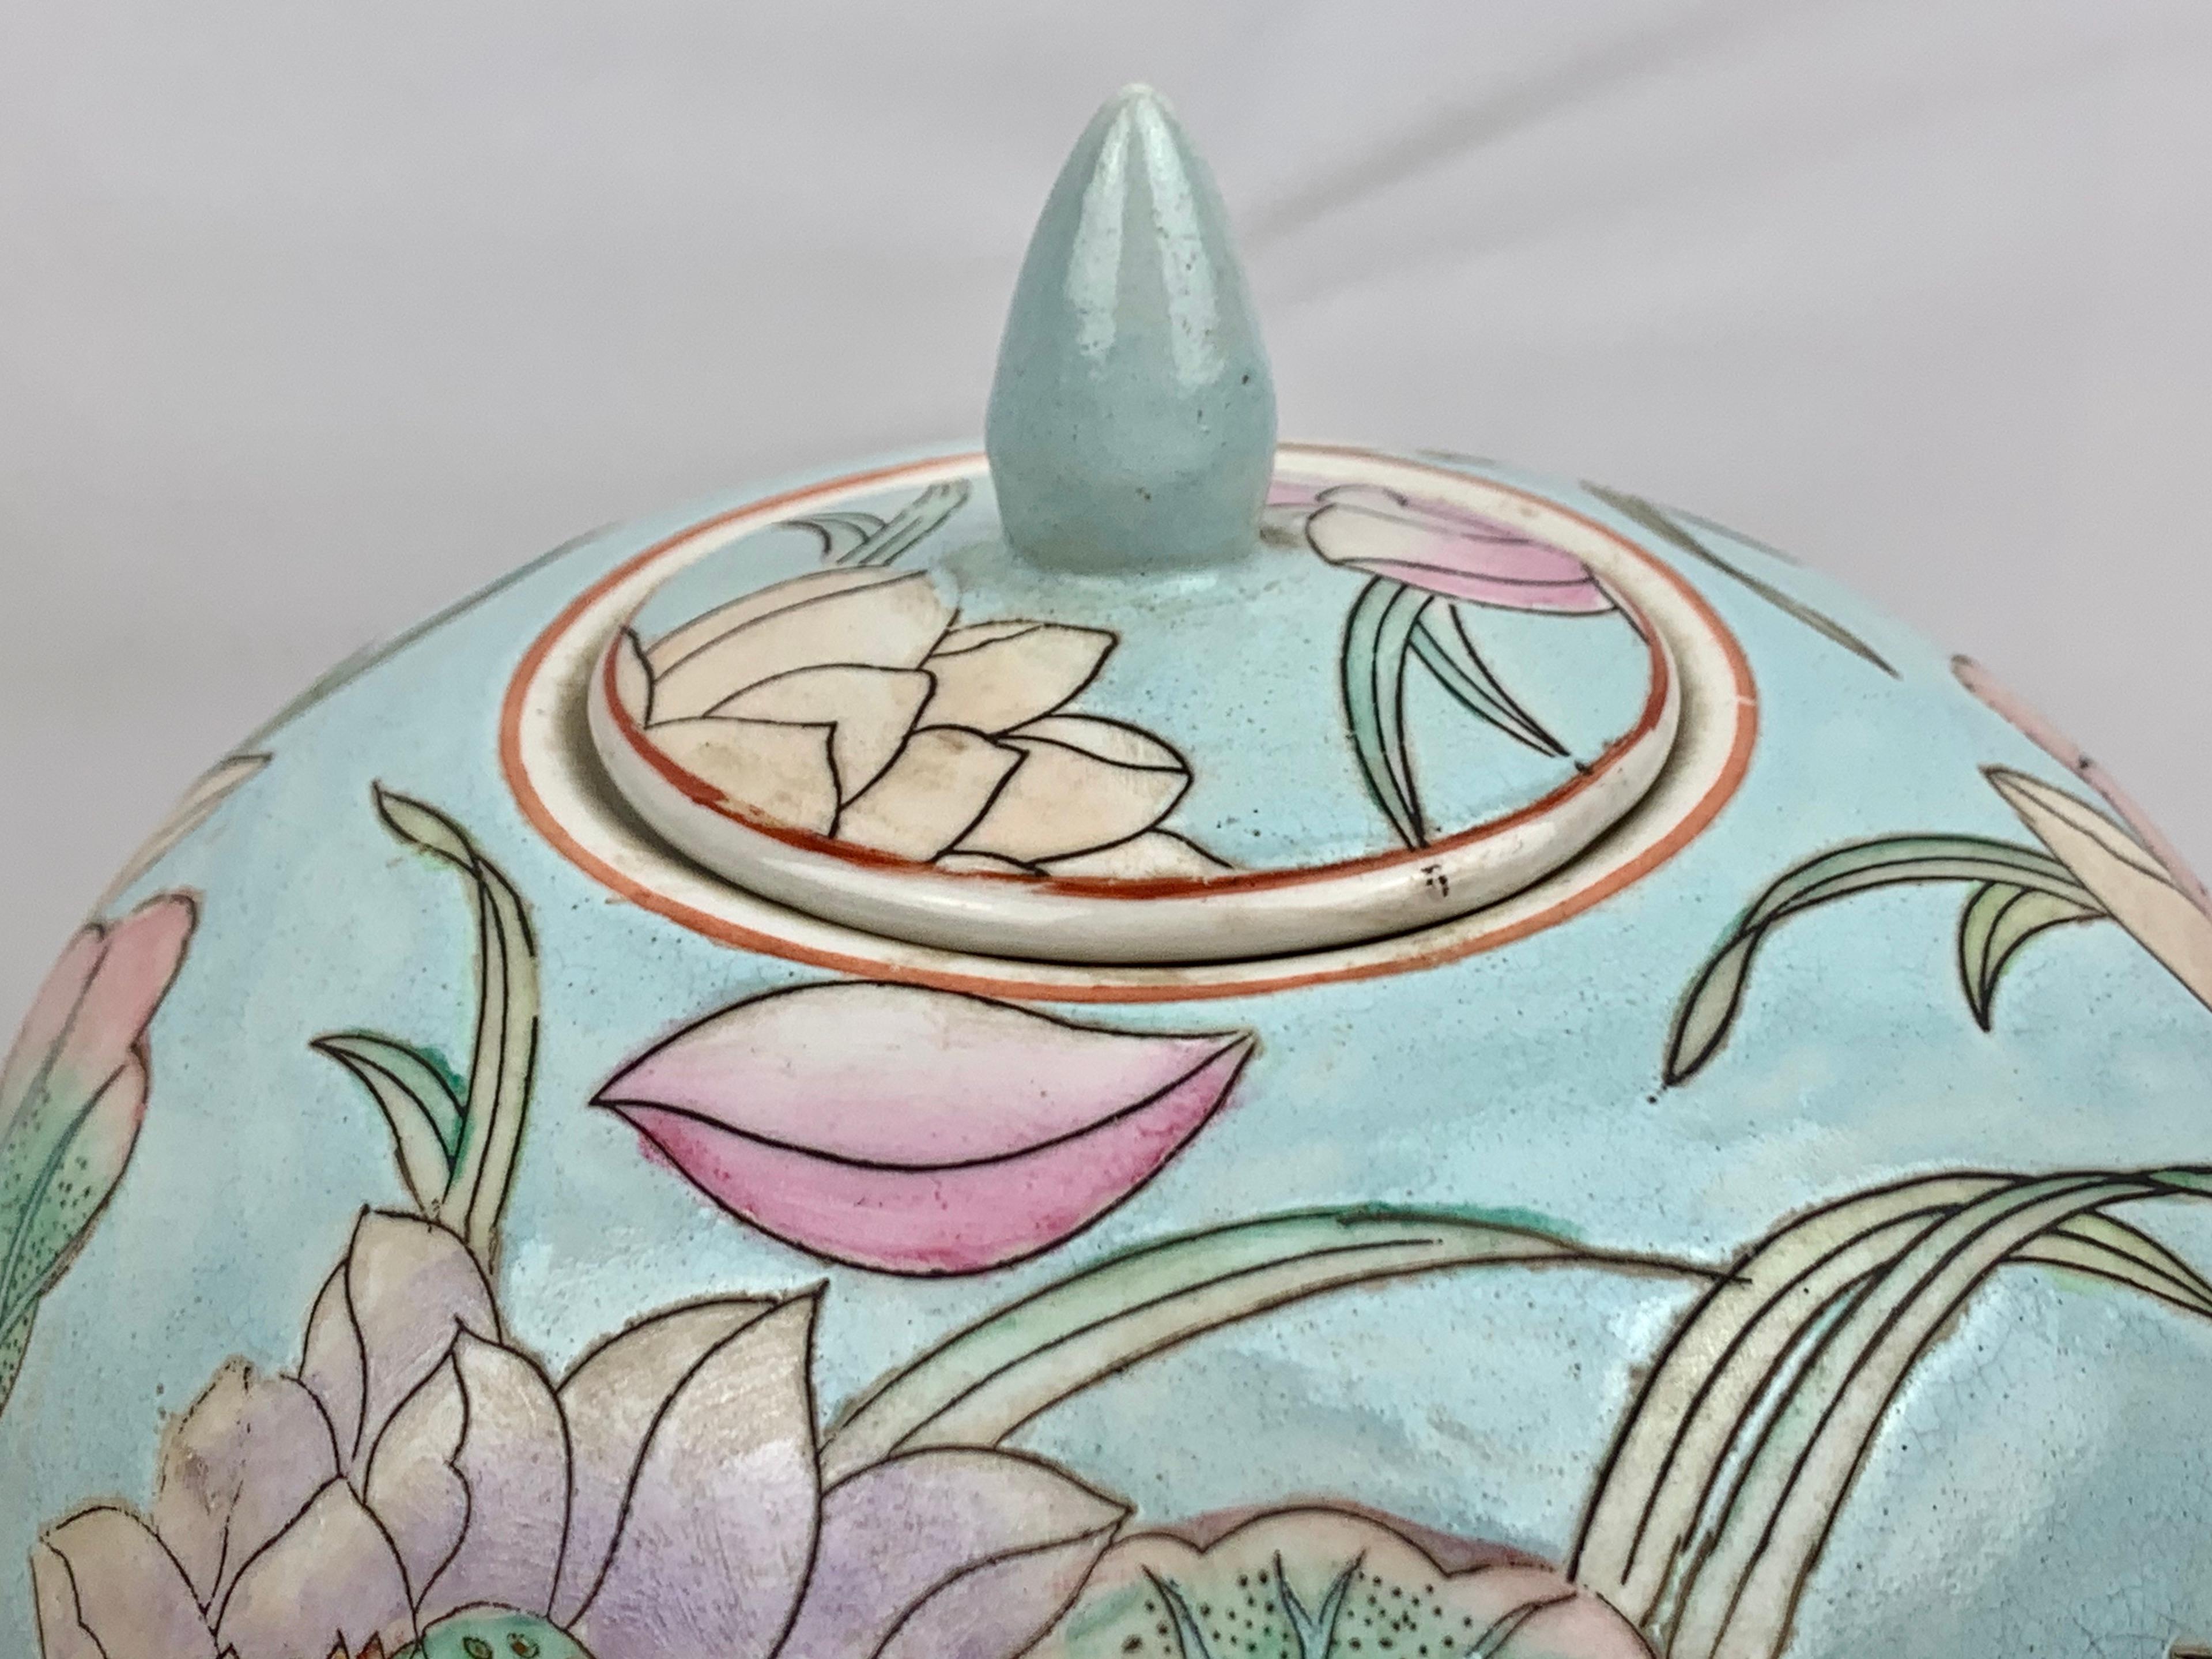 Chinoiserie Hand Painted Porcelain Ginger Jar in Floral Pastel Colors